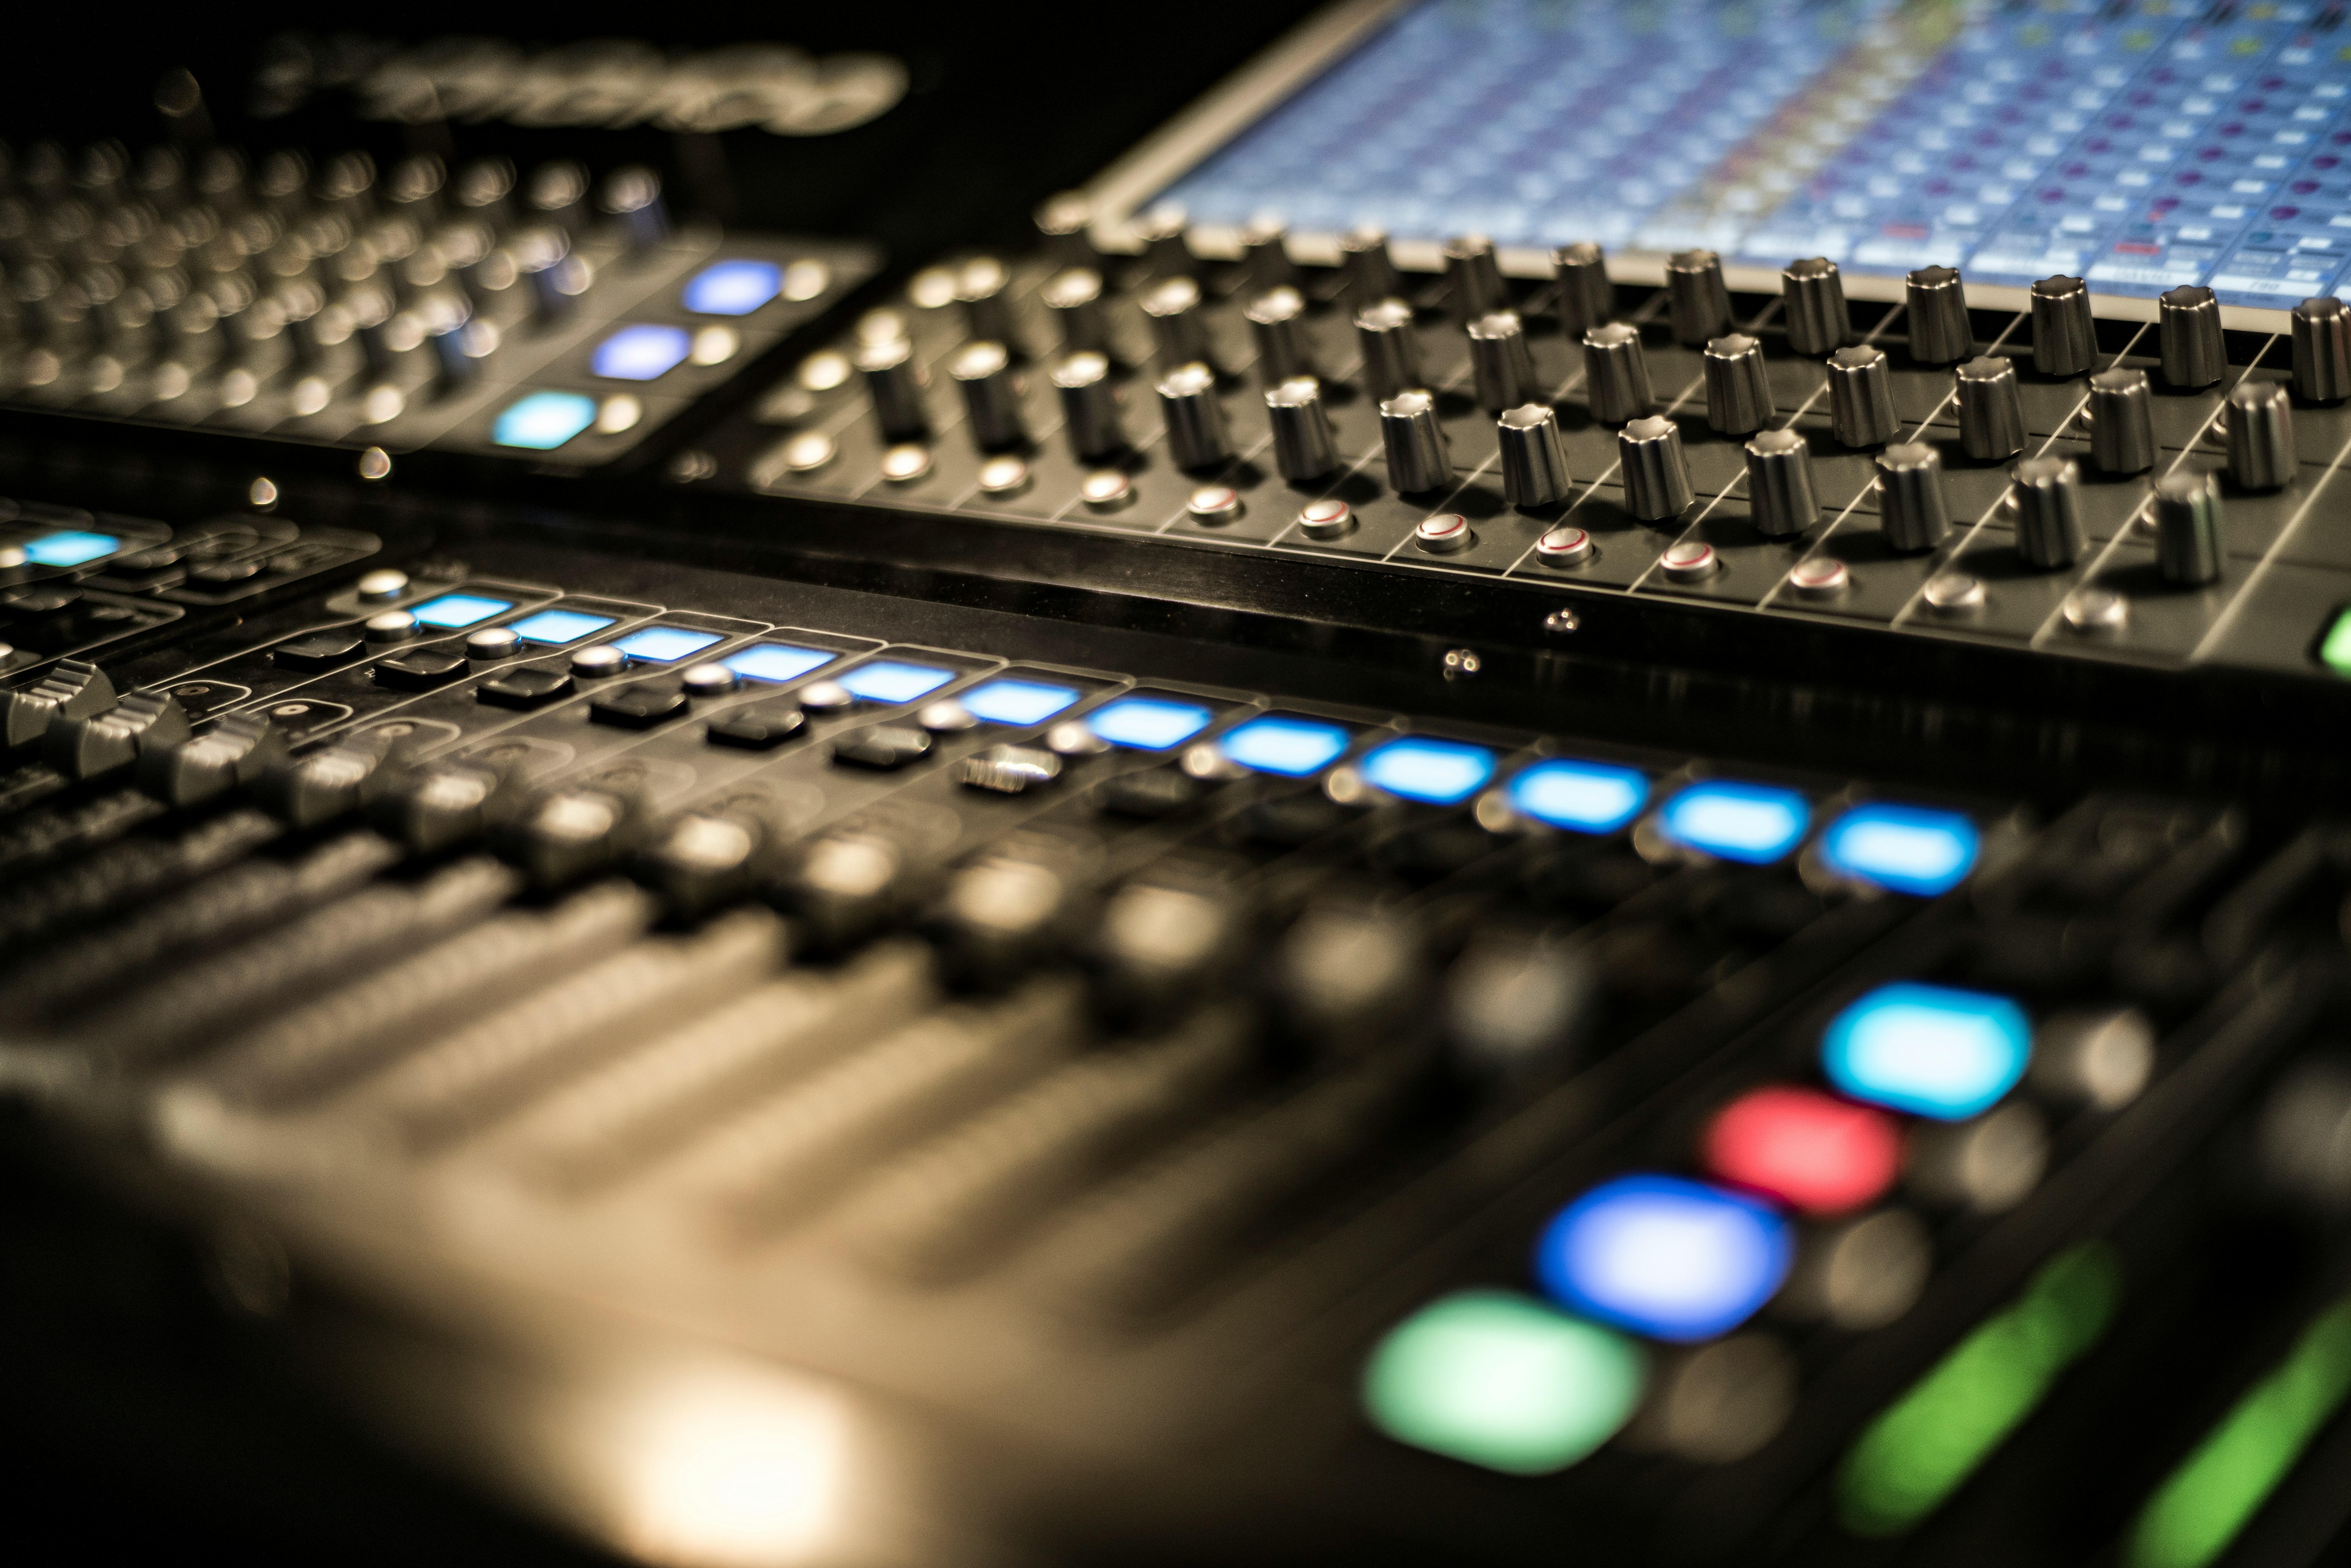 Photo of a sound mixing board from a digonal angle, close-up